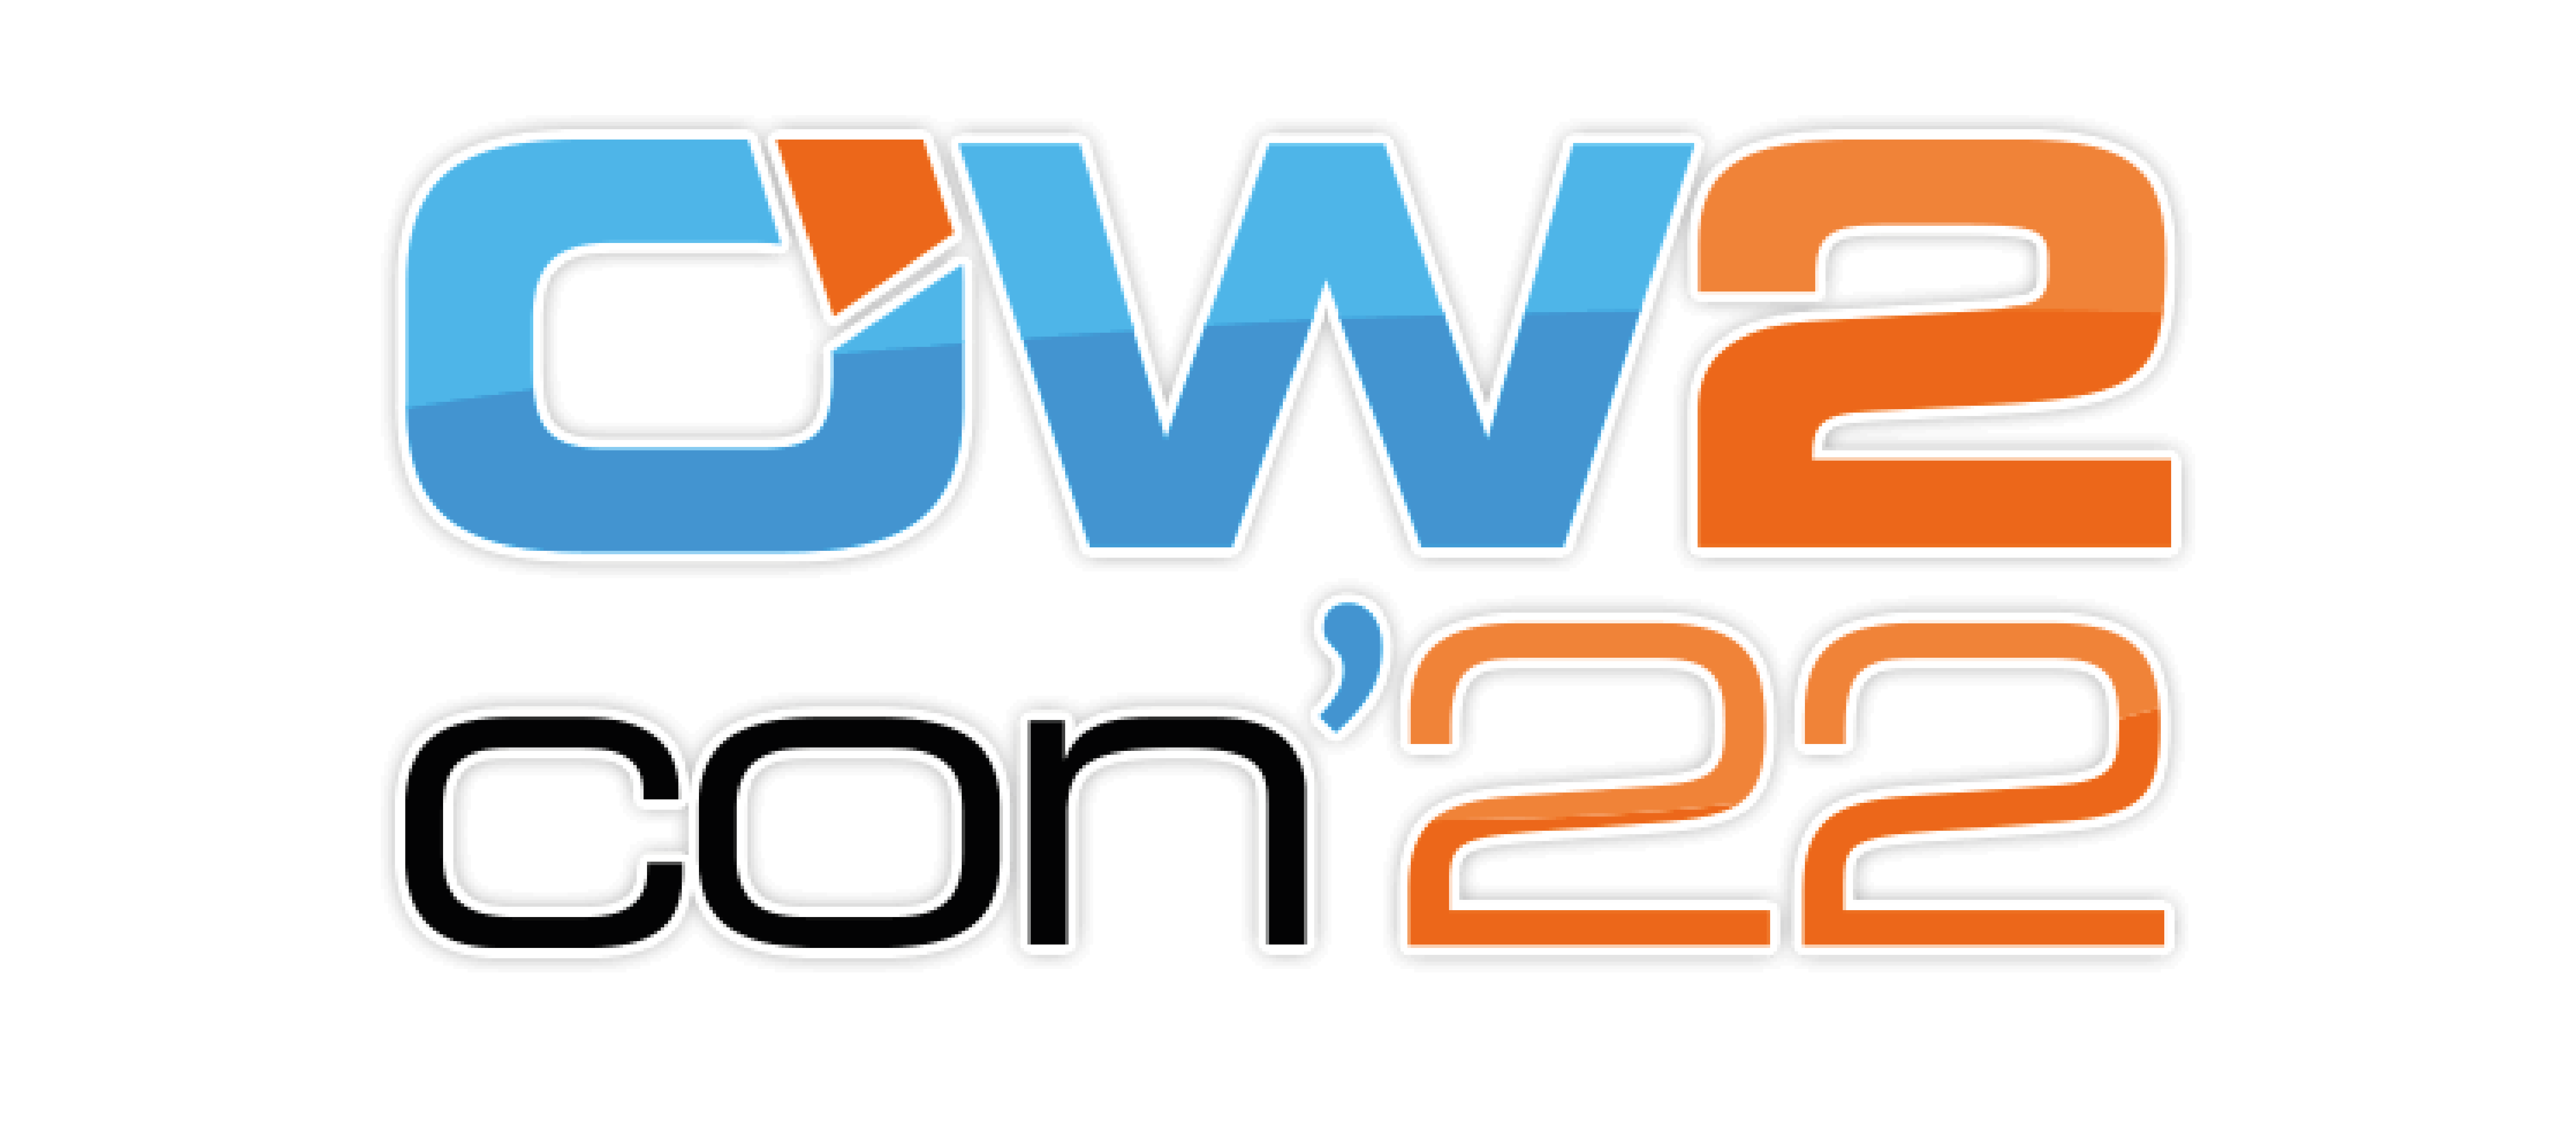 Centreon will be at the OW2con'22!